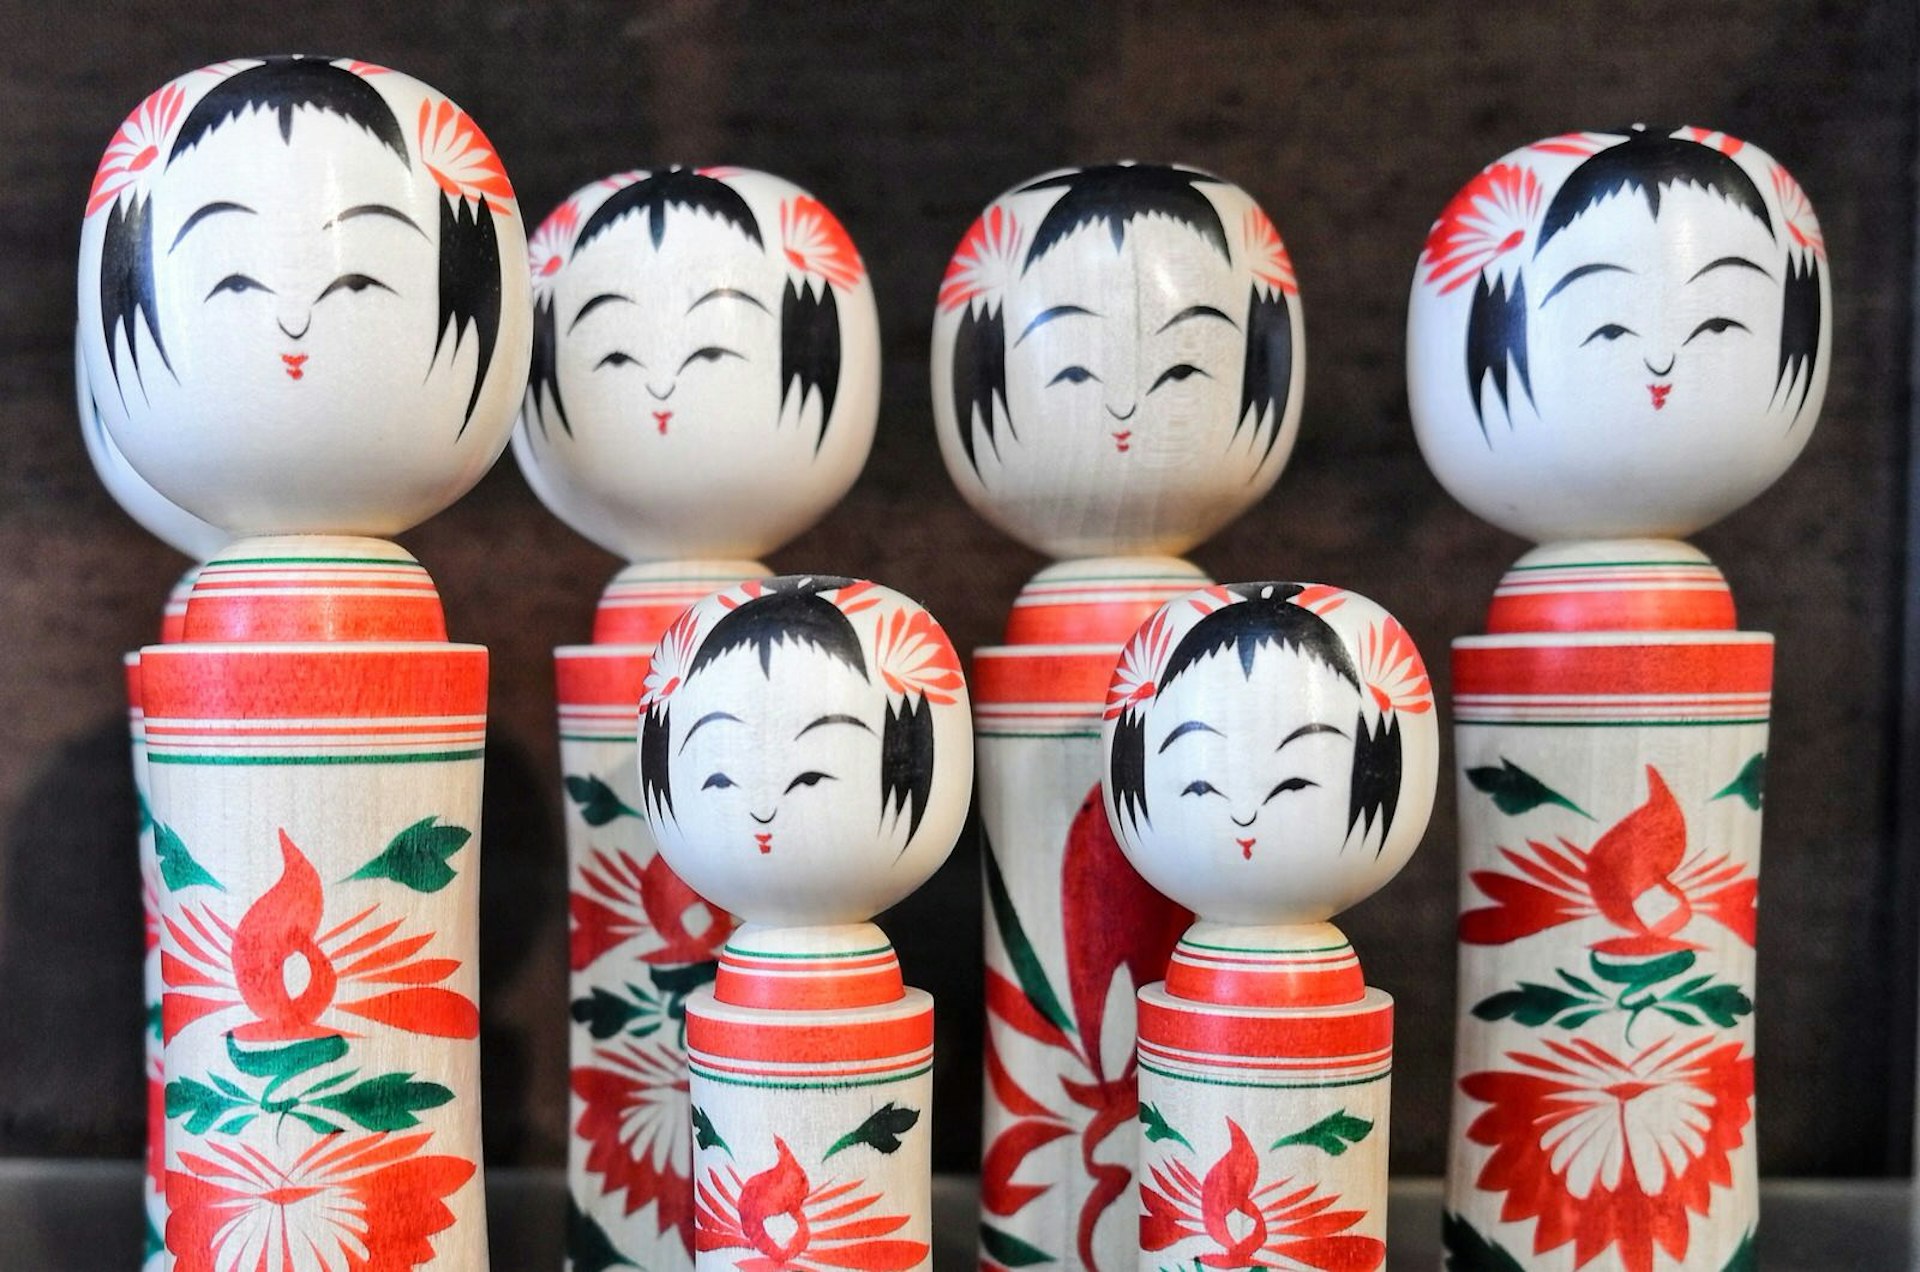 A collection of finished kokeshi with painted faces and chrysanthemum motifs on the body © Manami Okazaki / Lonely Planet